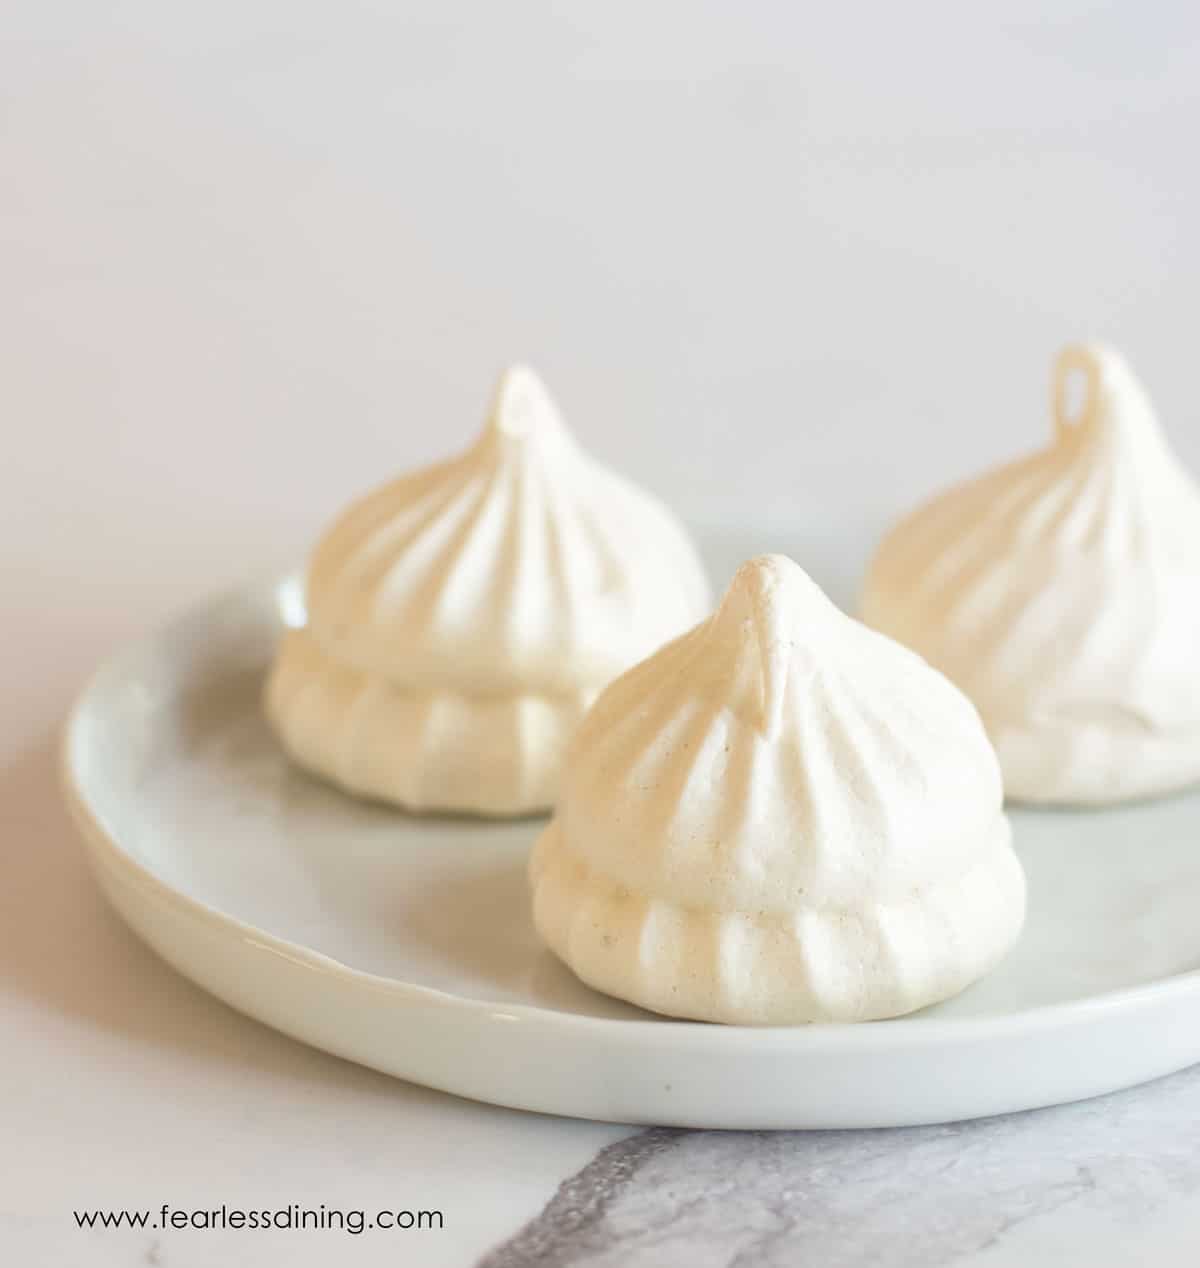 Three meringues on a white plate